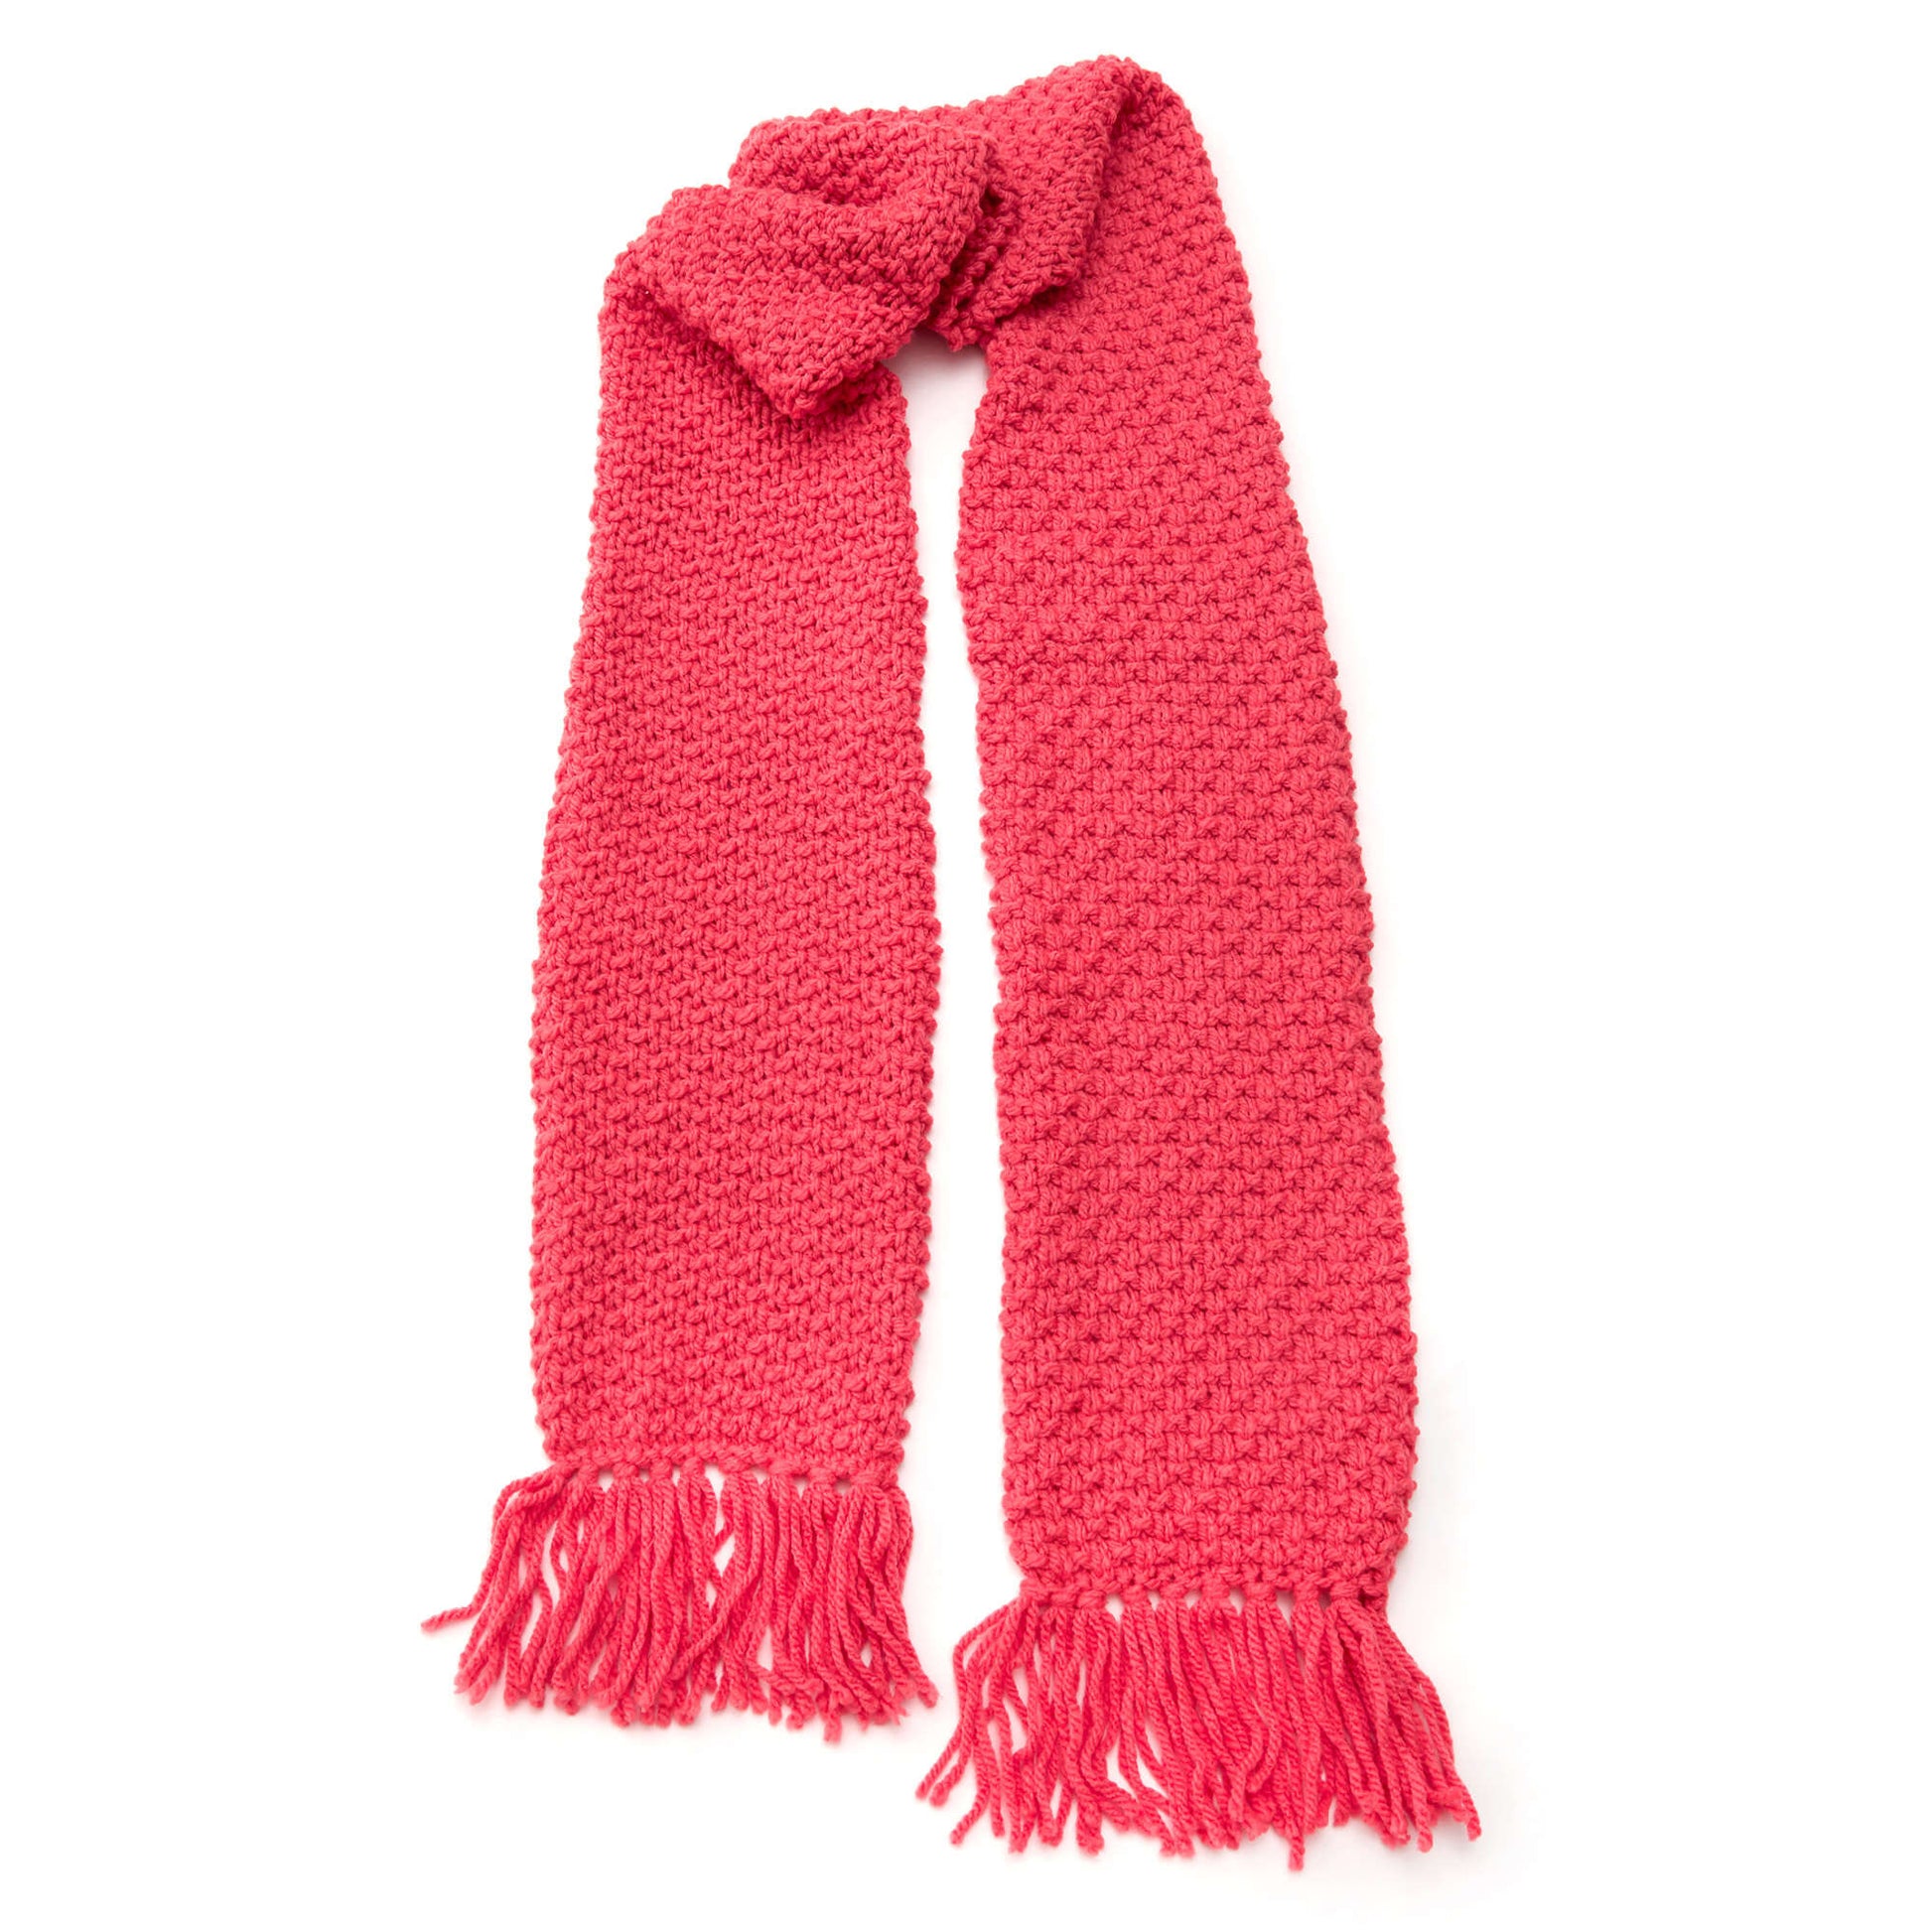 Free Red Heart Textured Fringe Scarf Pattern